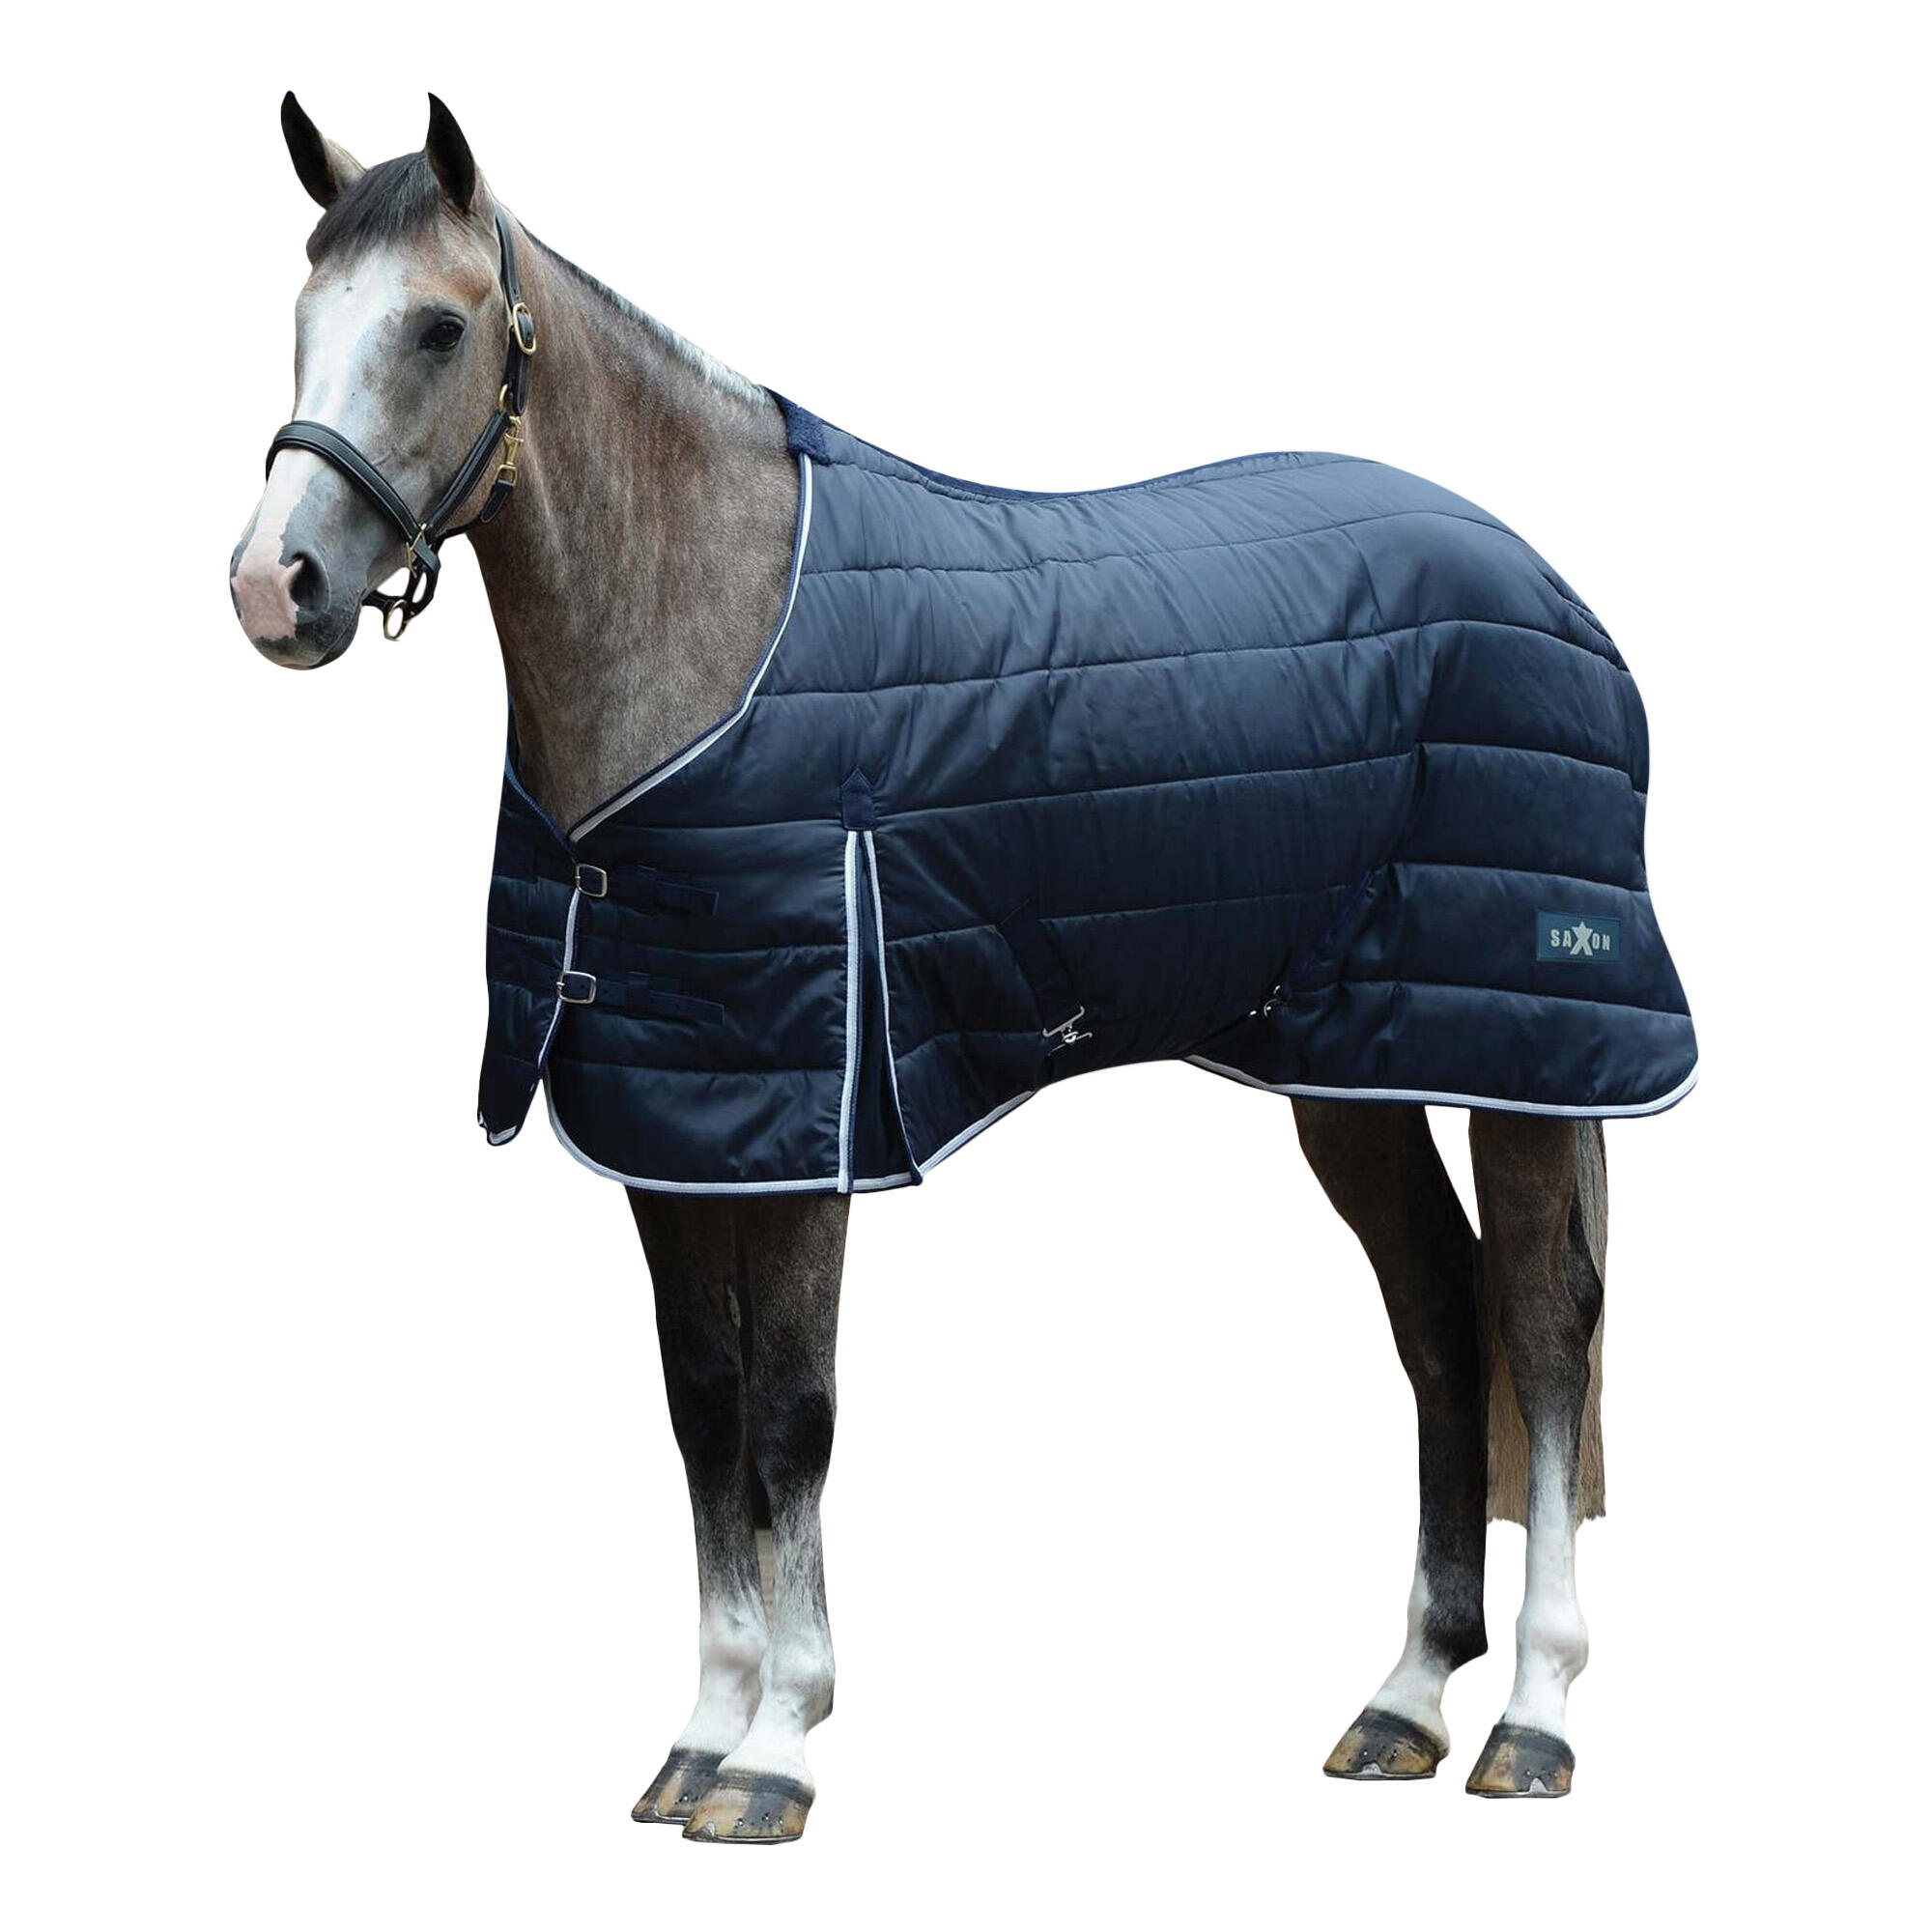 StandardNeck Channel Quilt Midweight Horse Stable Rug (Navy/White) 1/3